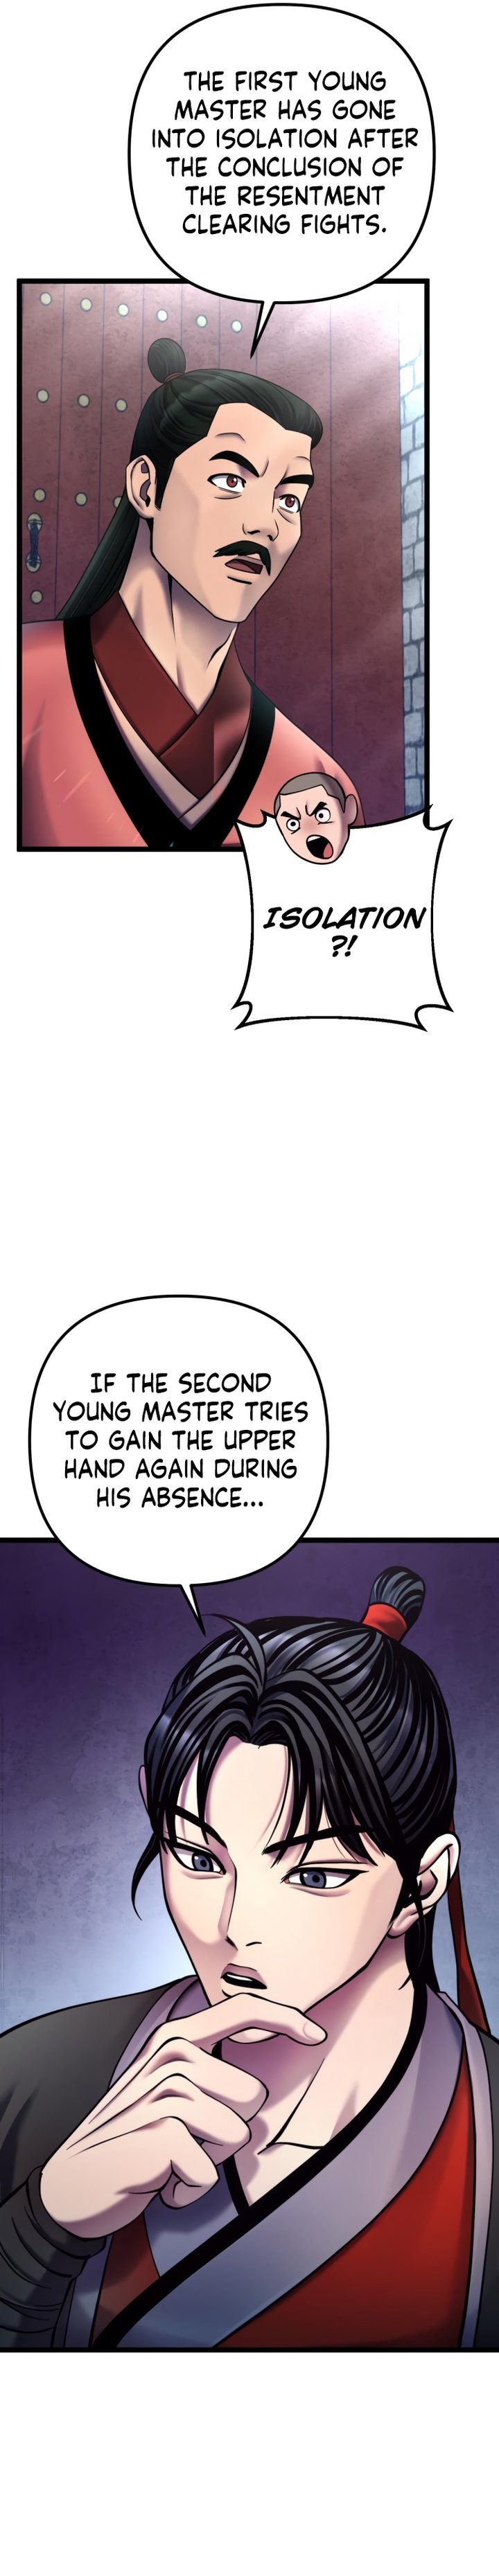 revenge_of_young_master_peng_82_3